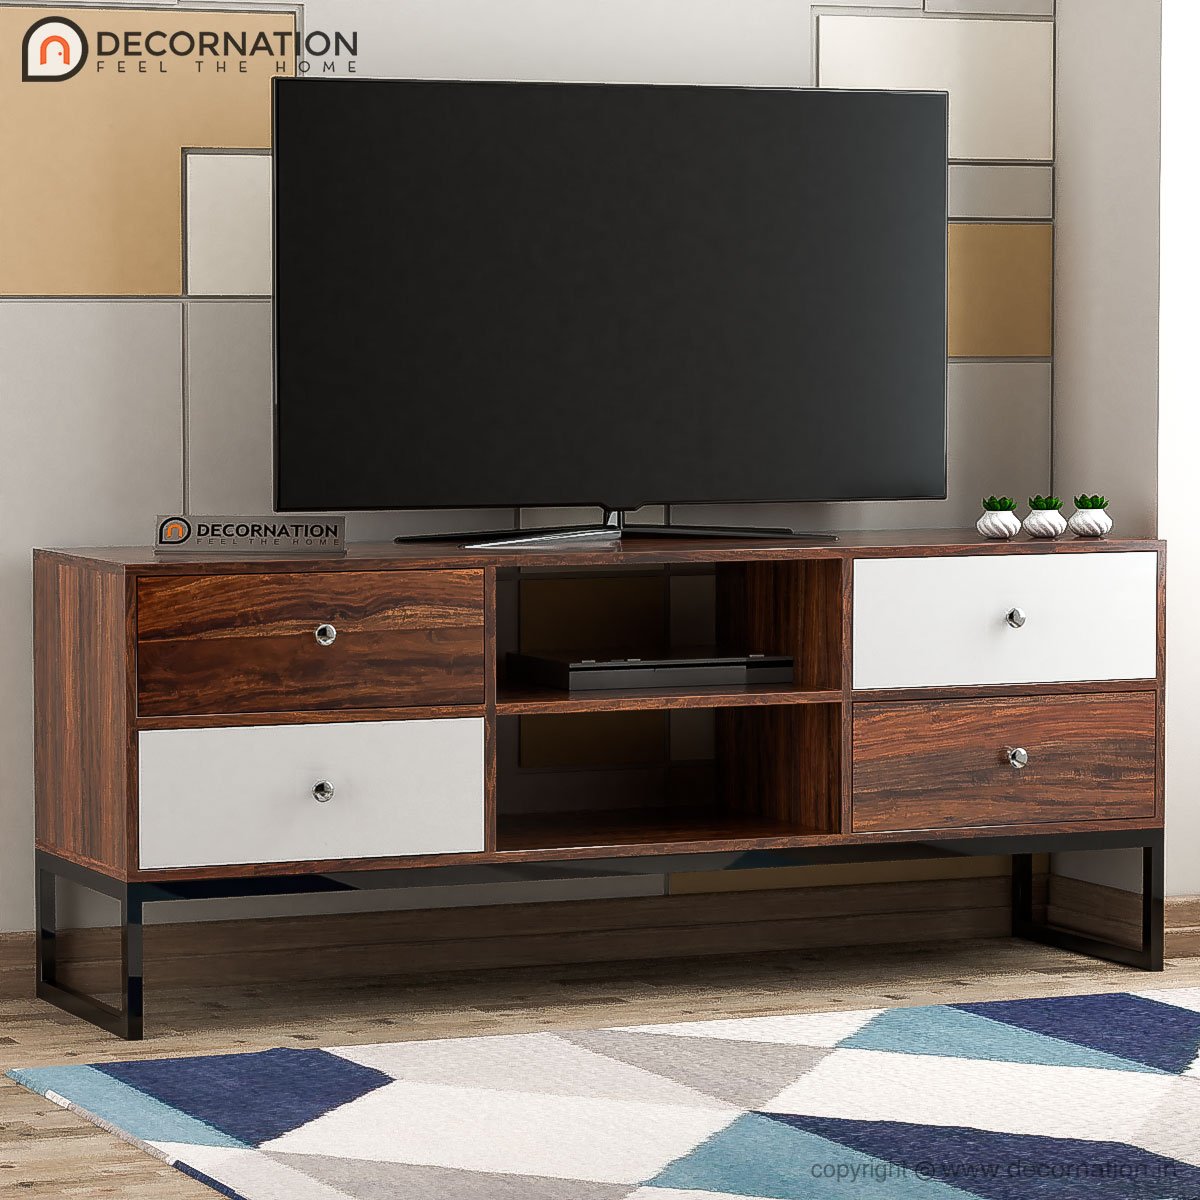 Eris Wood TV Table With 4 Drawers – White and Brown